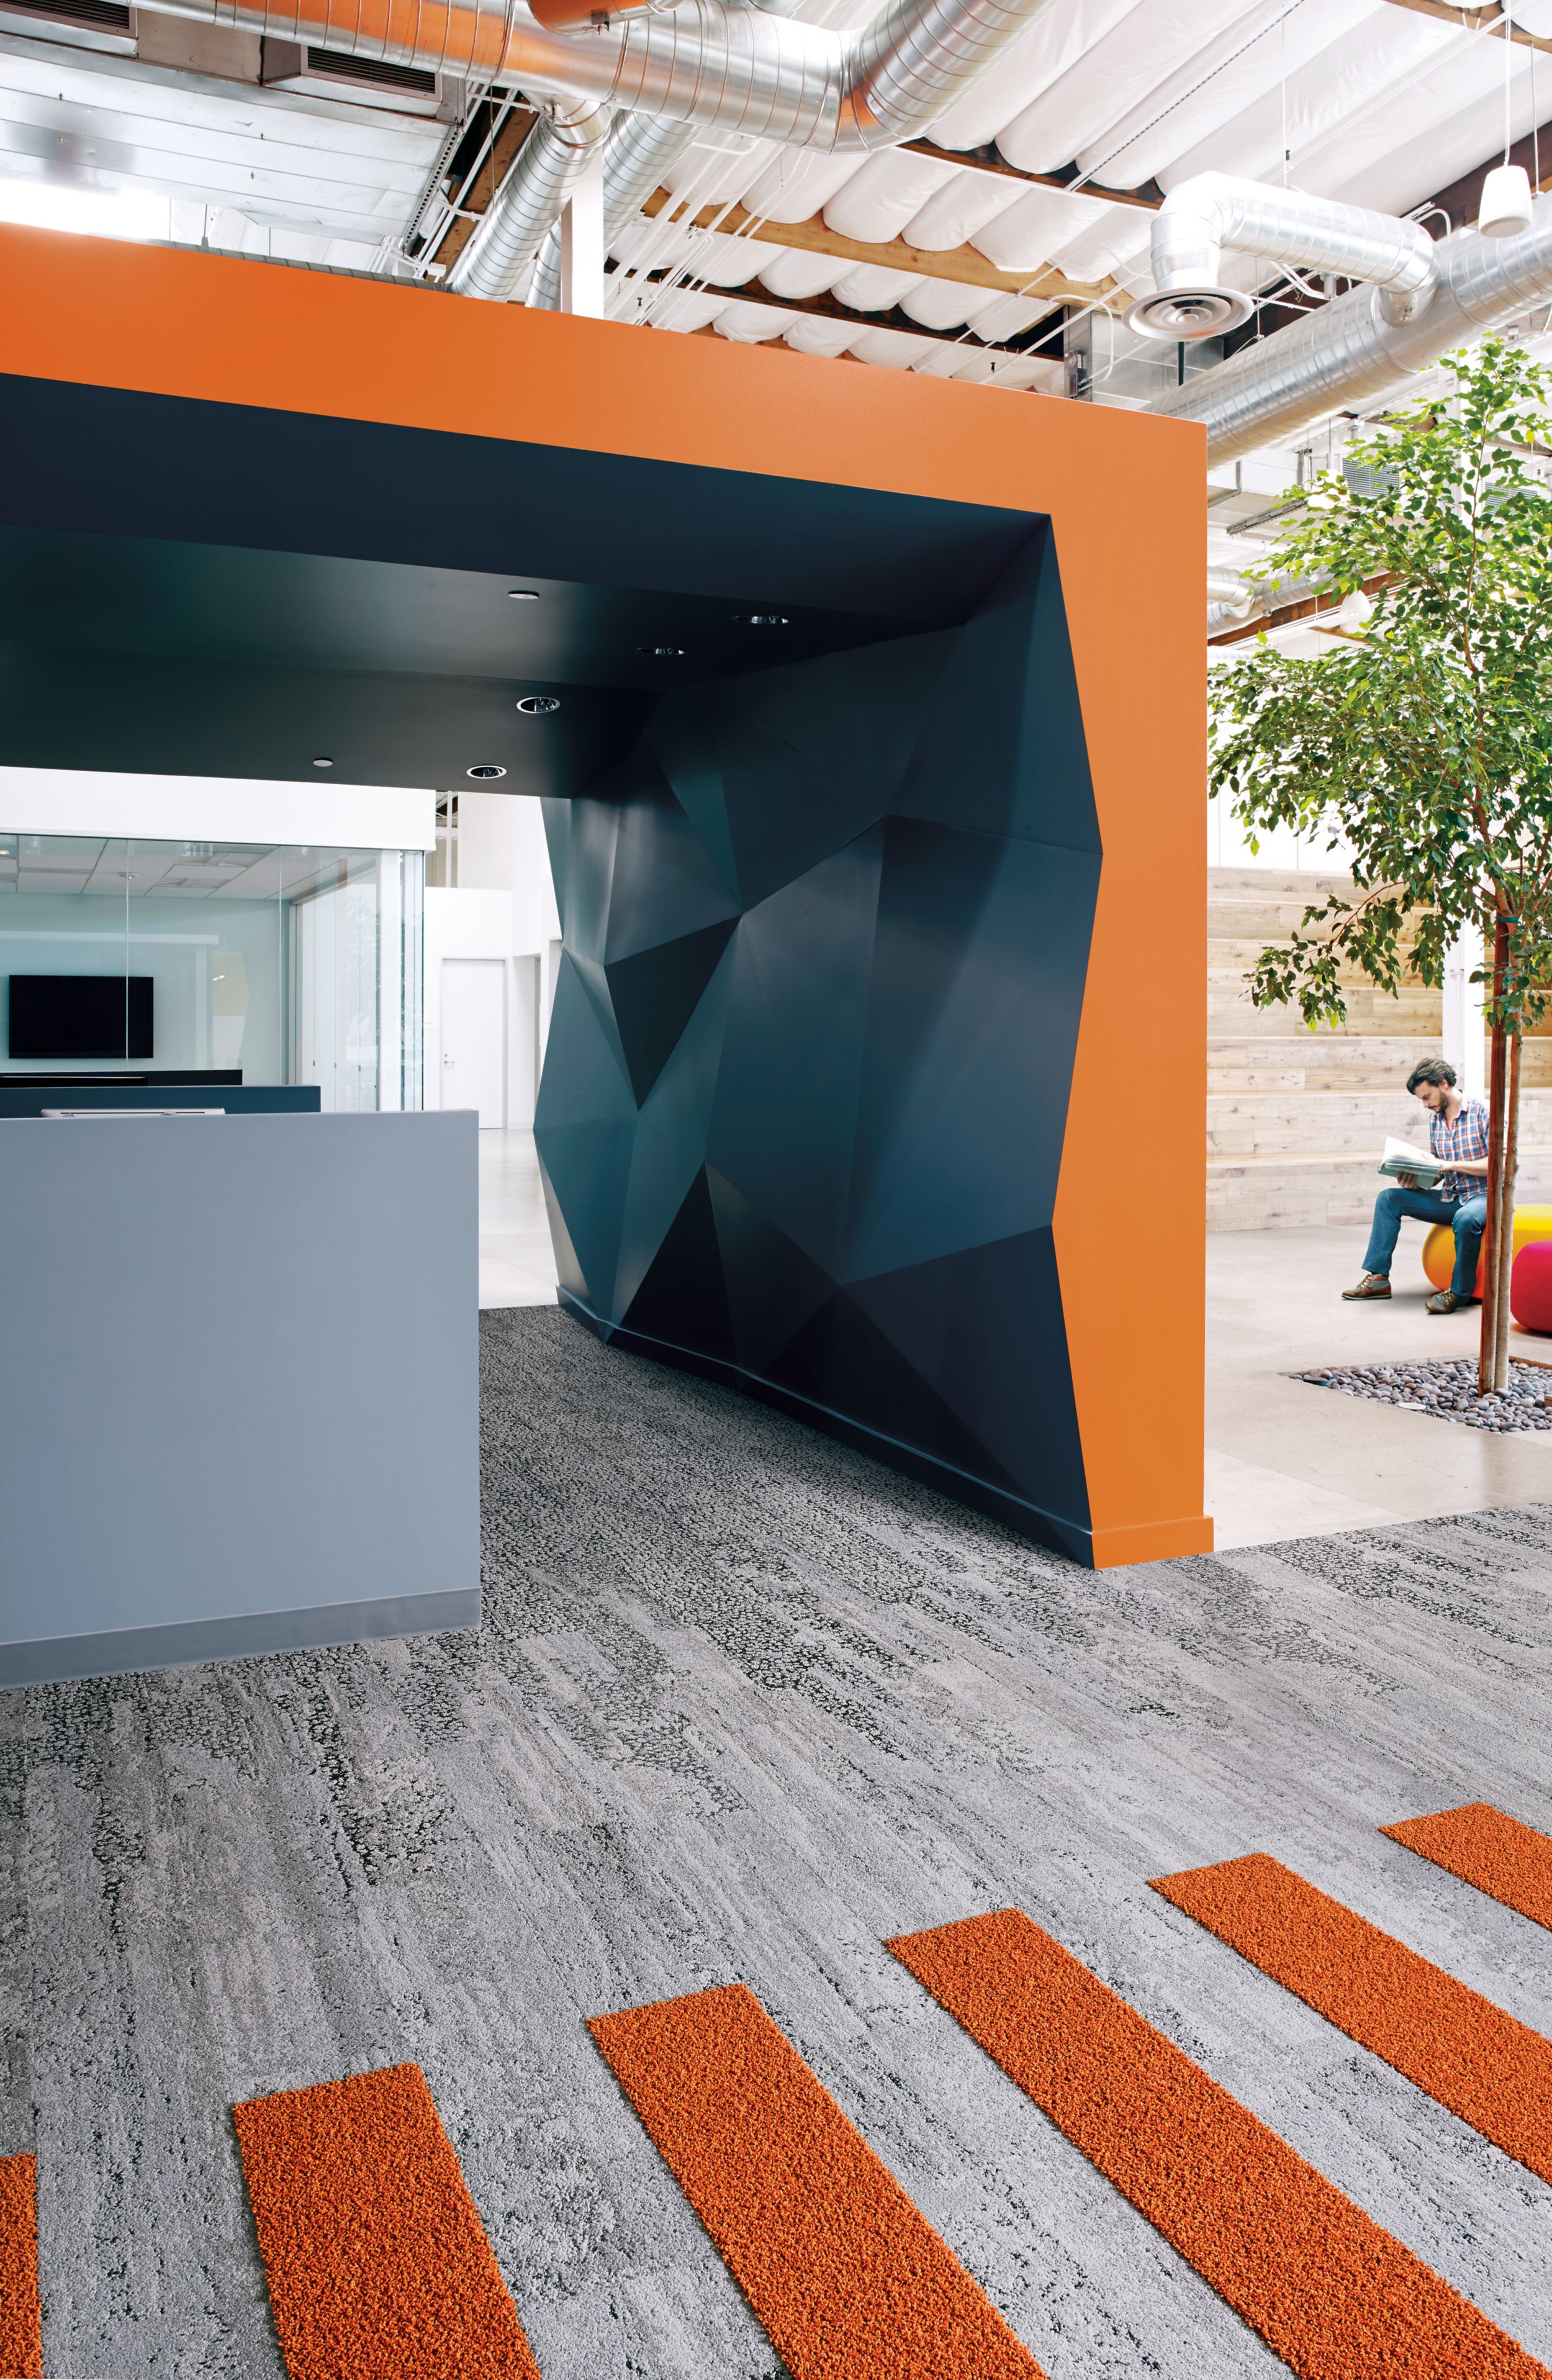 Interface HN810, HN830, HN840 and HN850 plank carpet tiles in blue and orange covered space with man reading on ball chair número de imagen 4